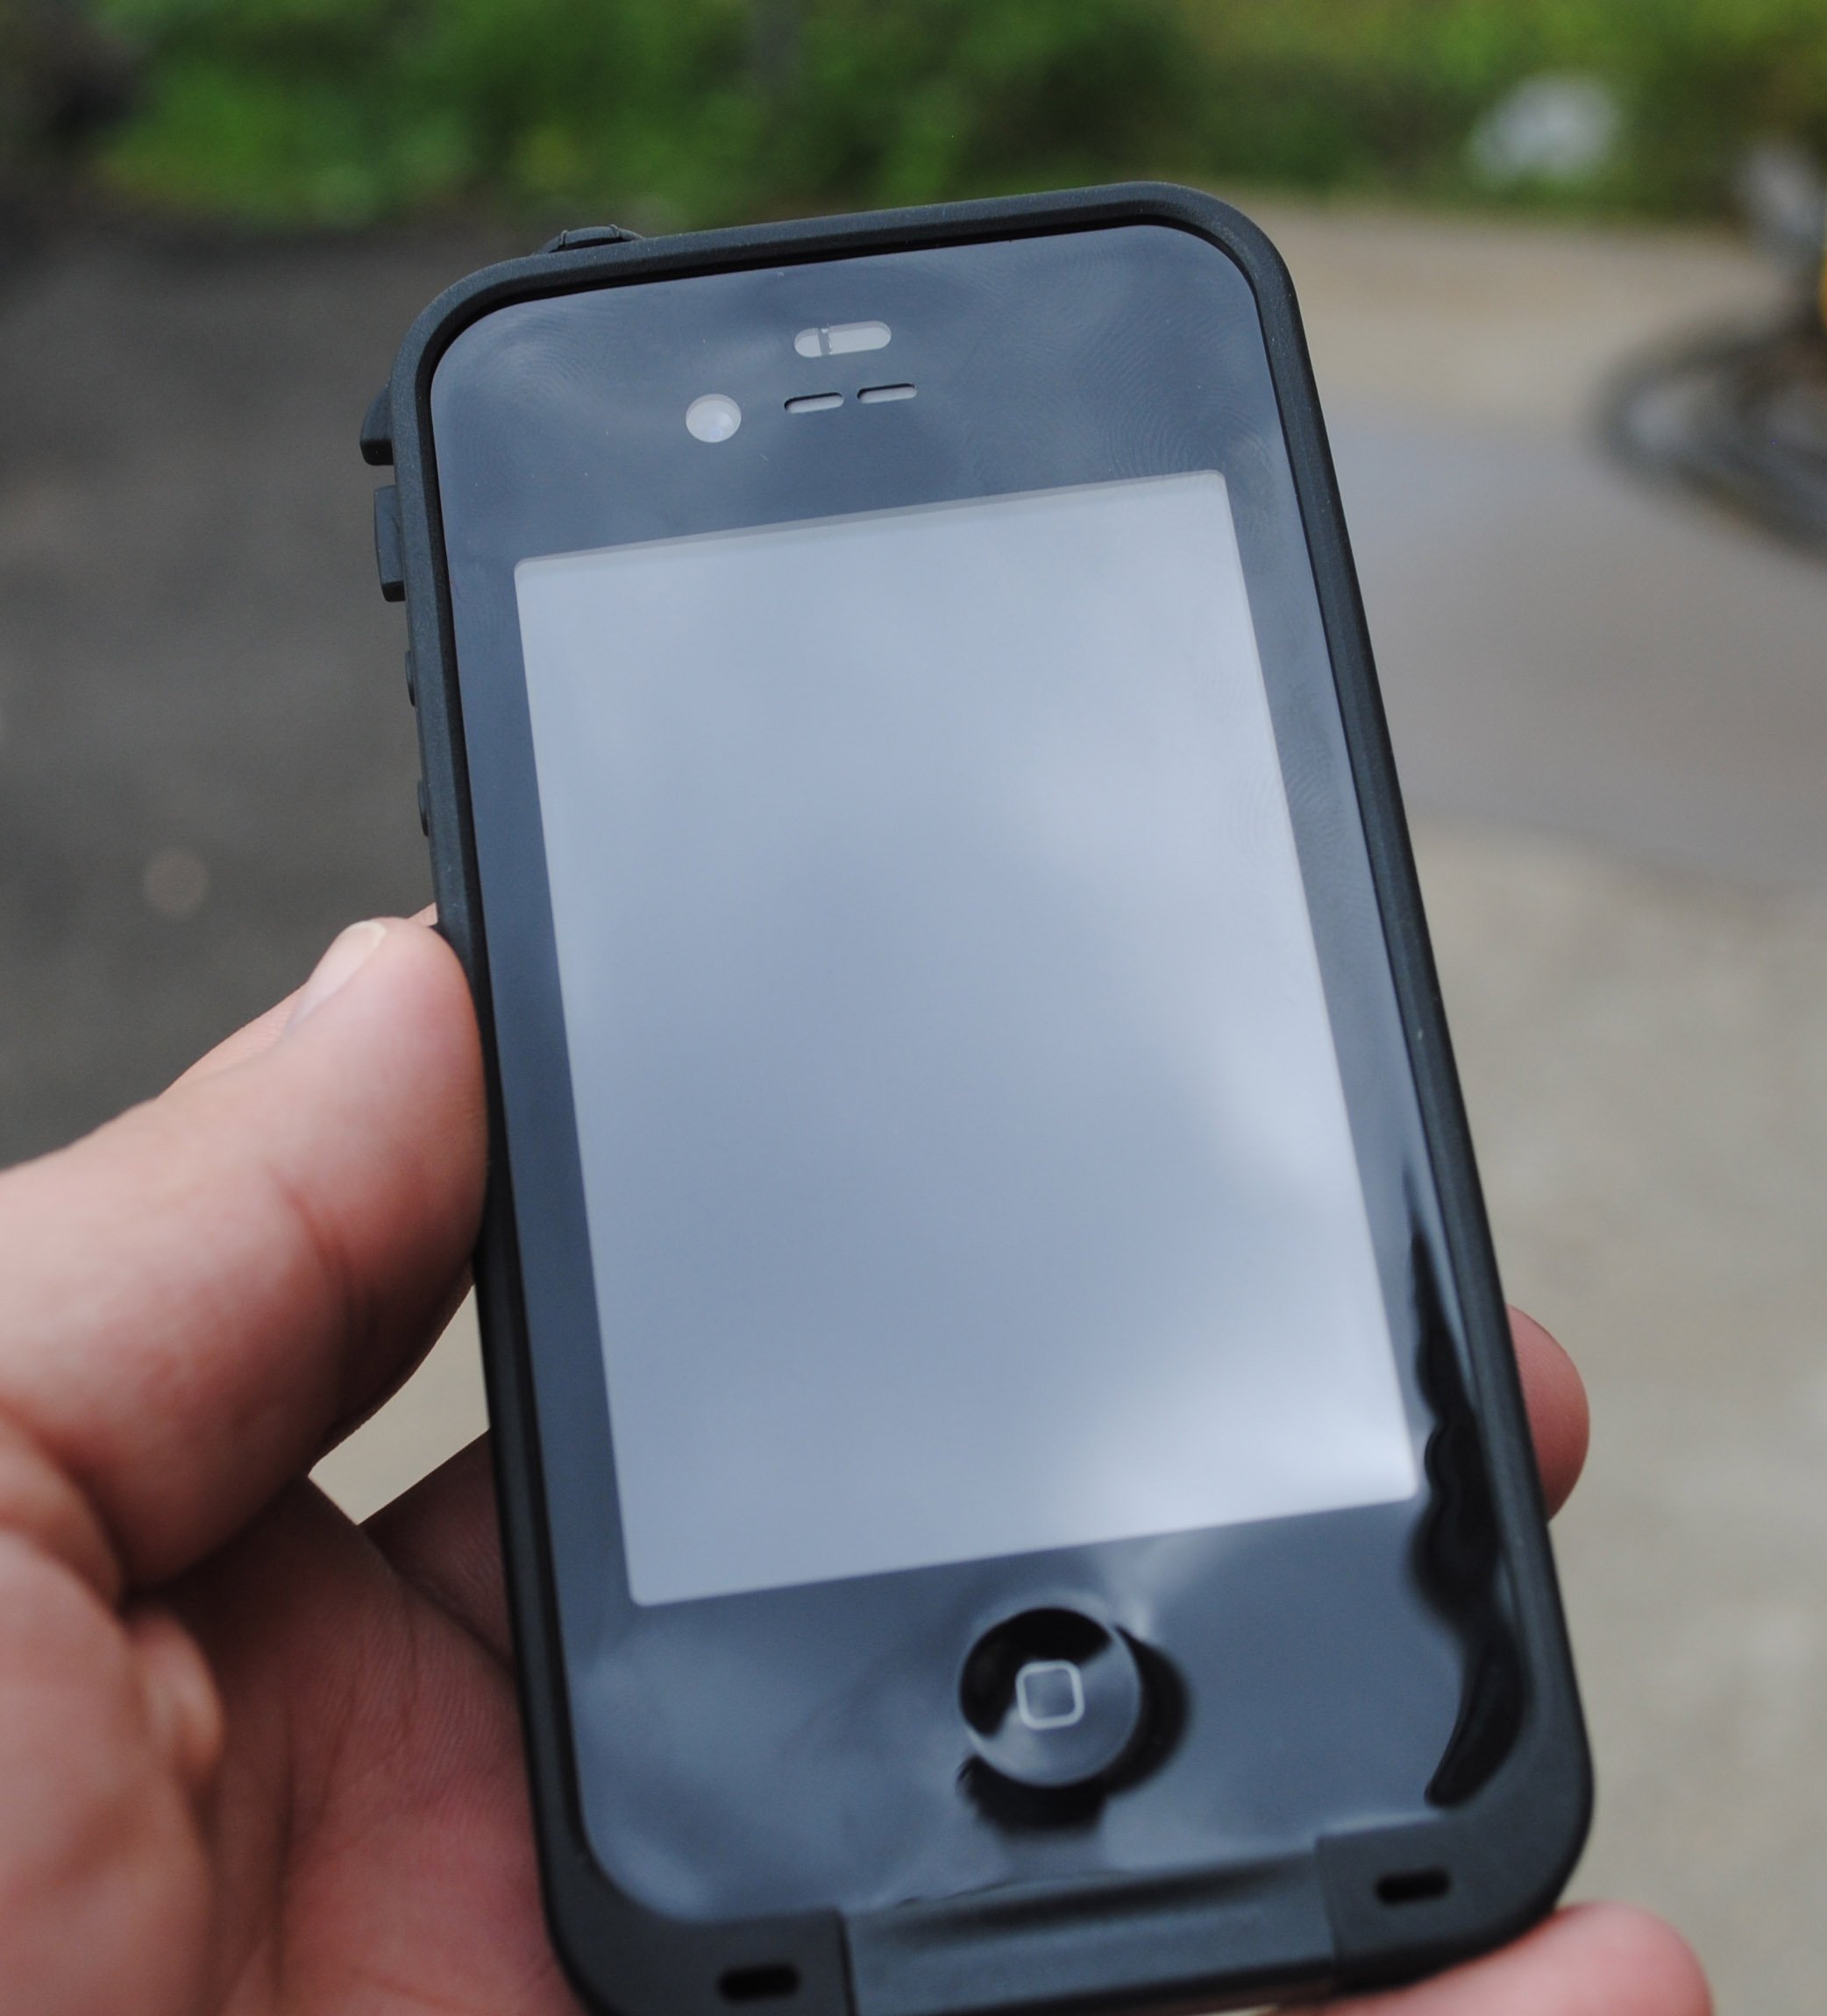 LifeProof case for the iPhone 4S review [giveaway] | iMore